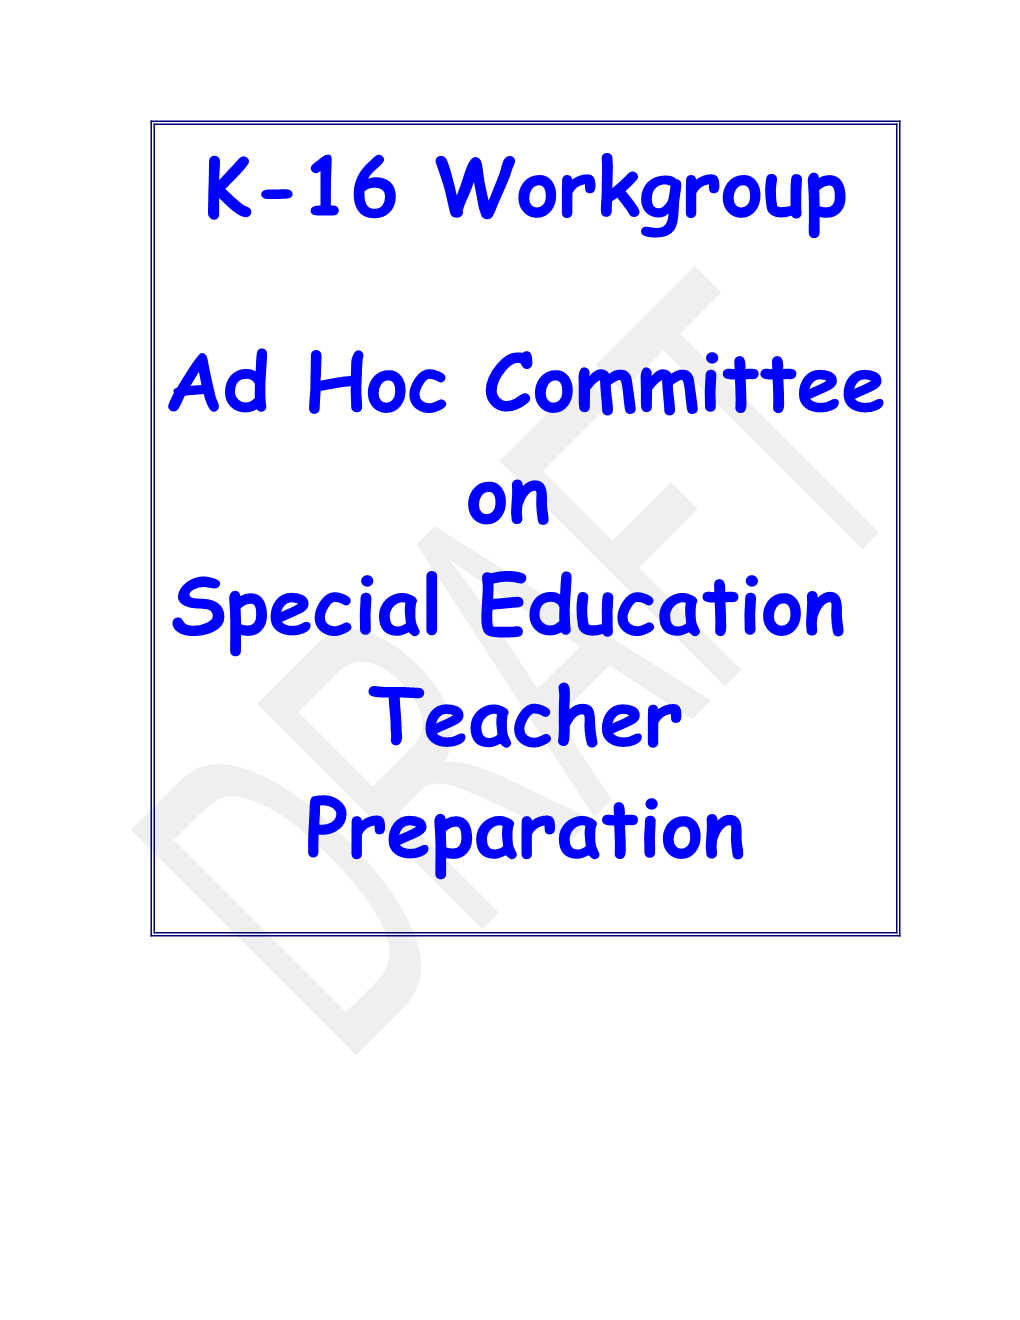 K-16 Workgroup Ad Hoc Committee on Special Education Teacher Preparation